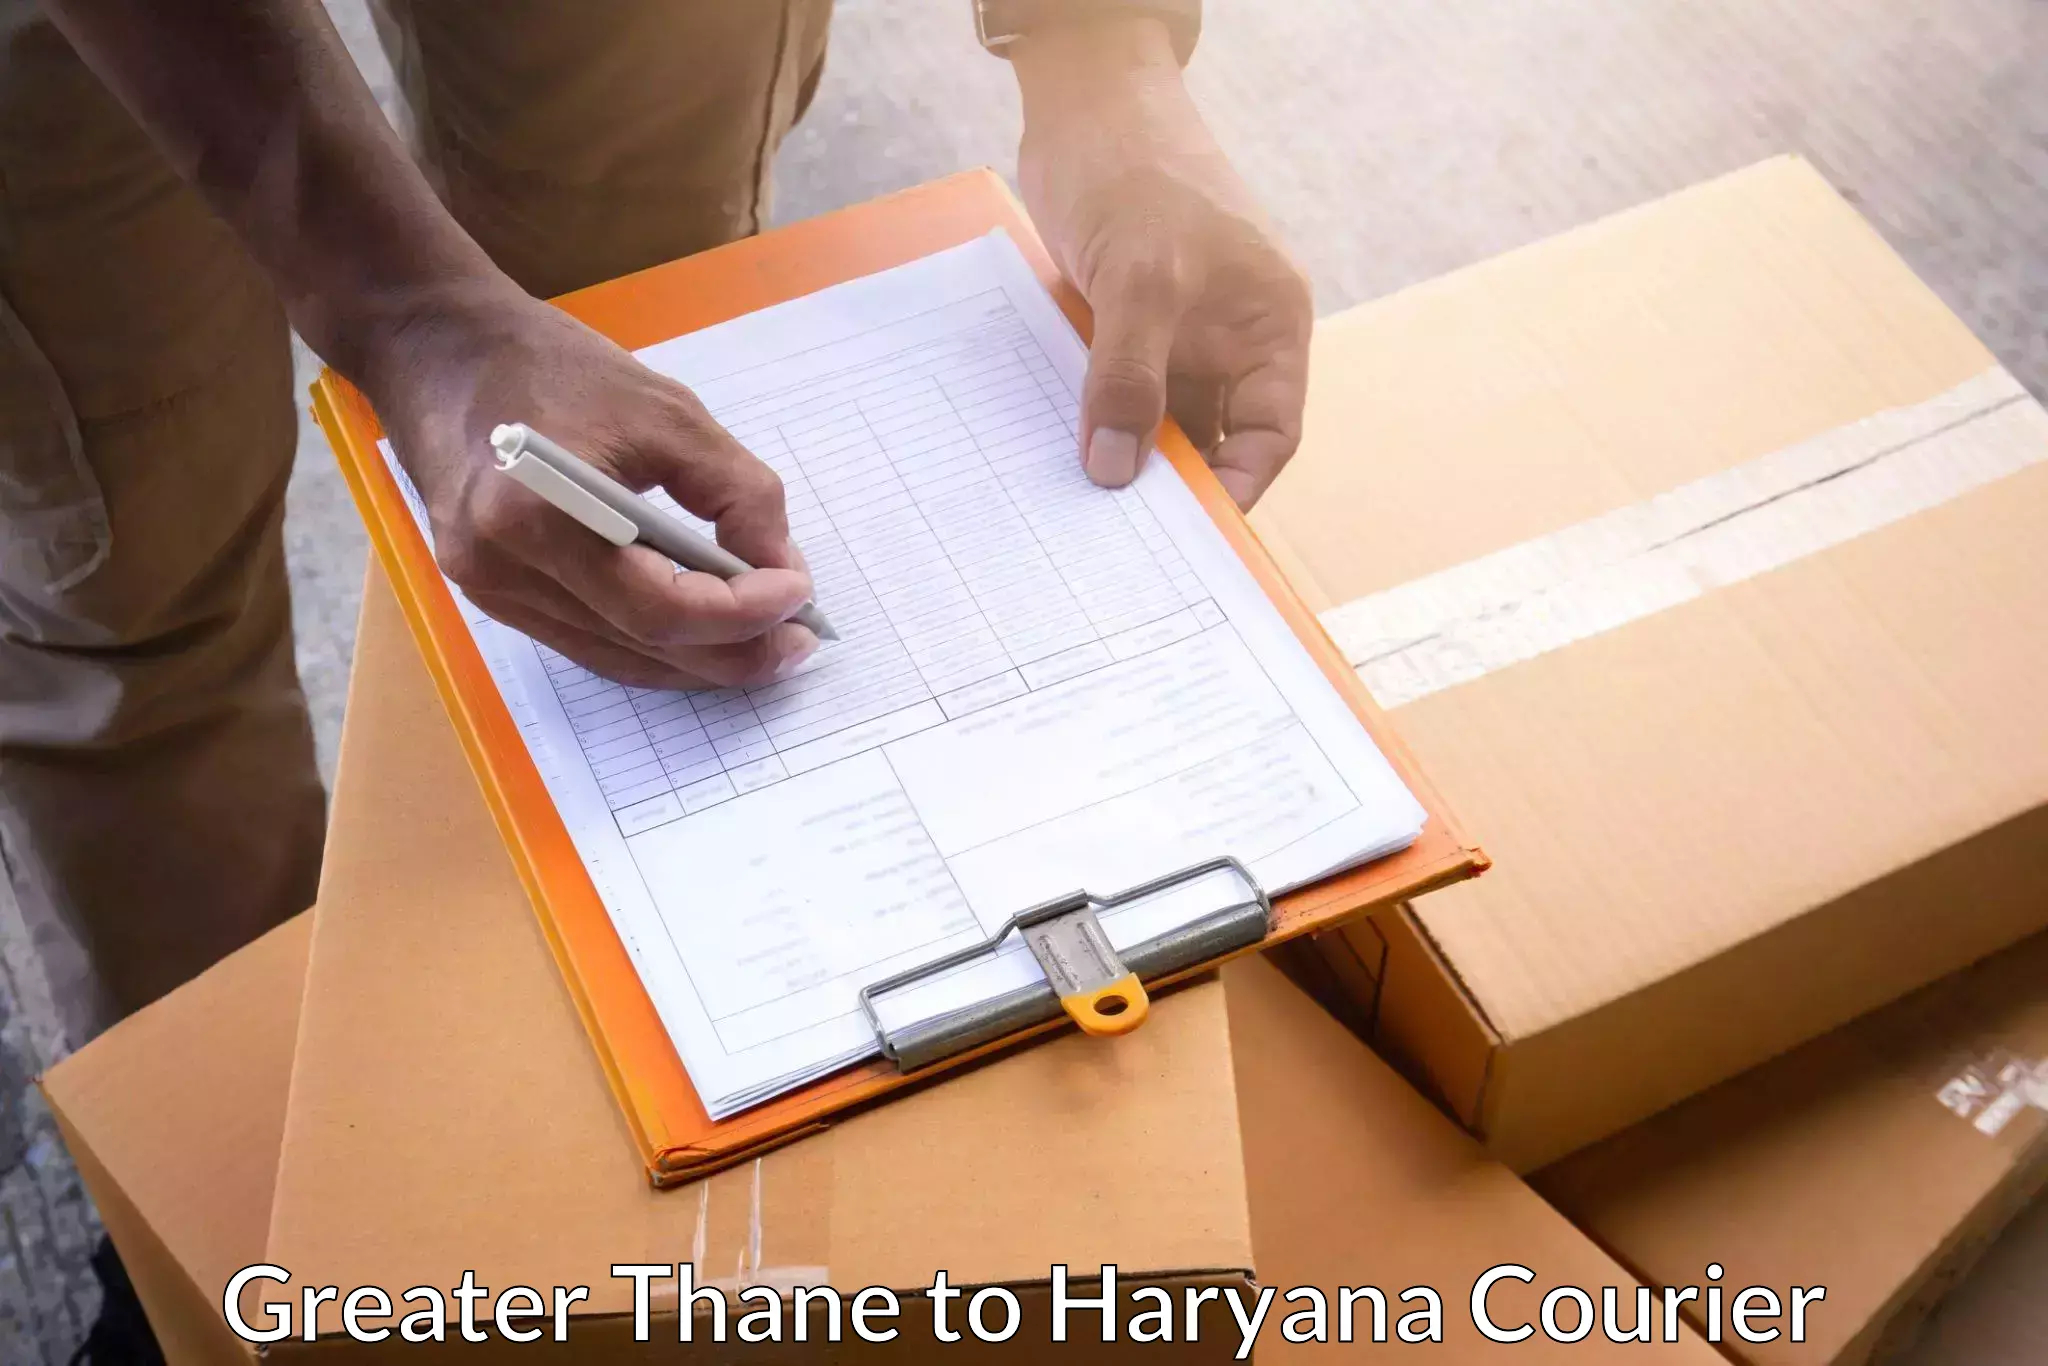 Customer-focused courier Greater Thane to Panchkula